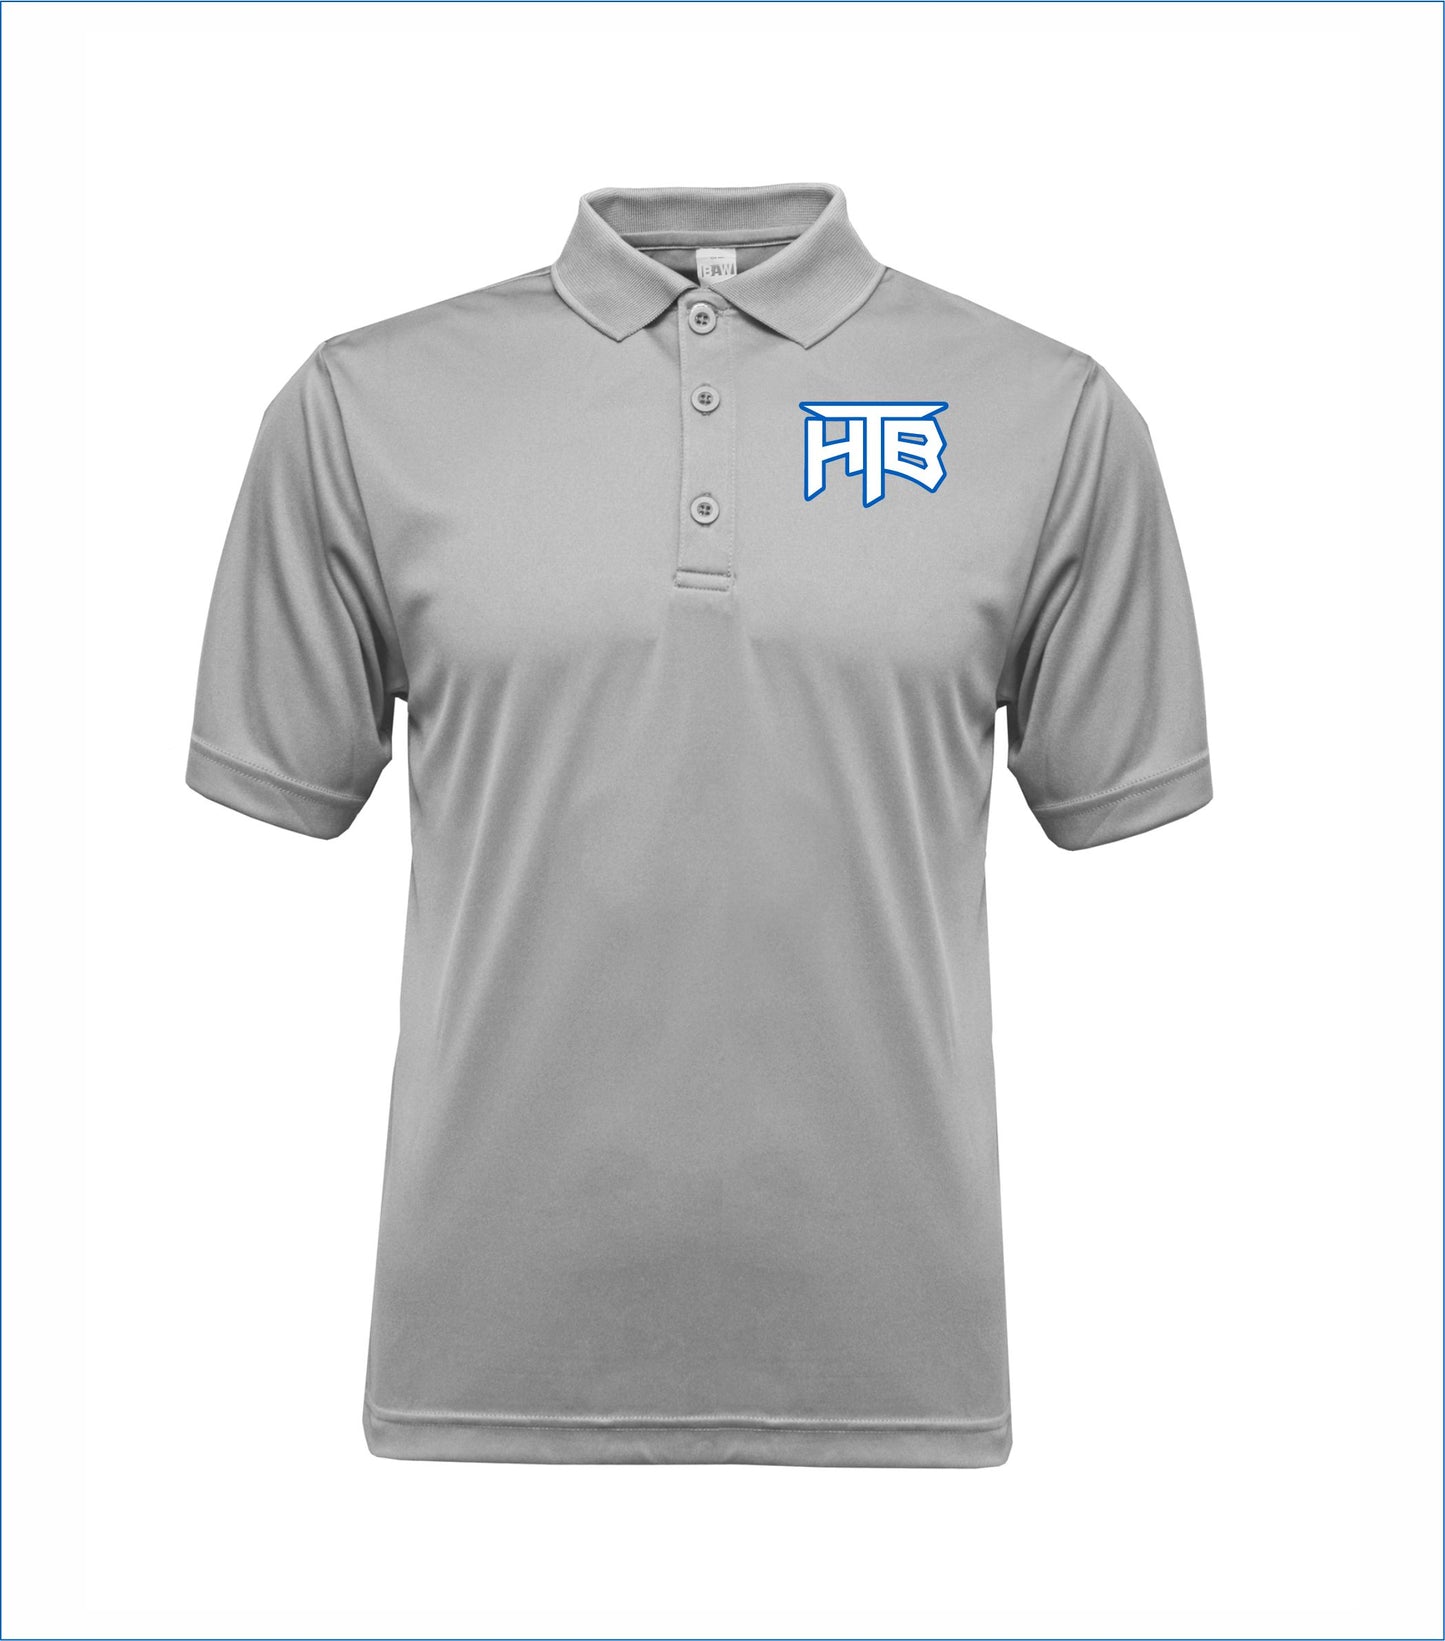 HTB Embroidered Polo